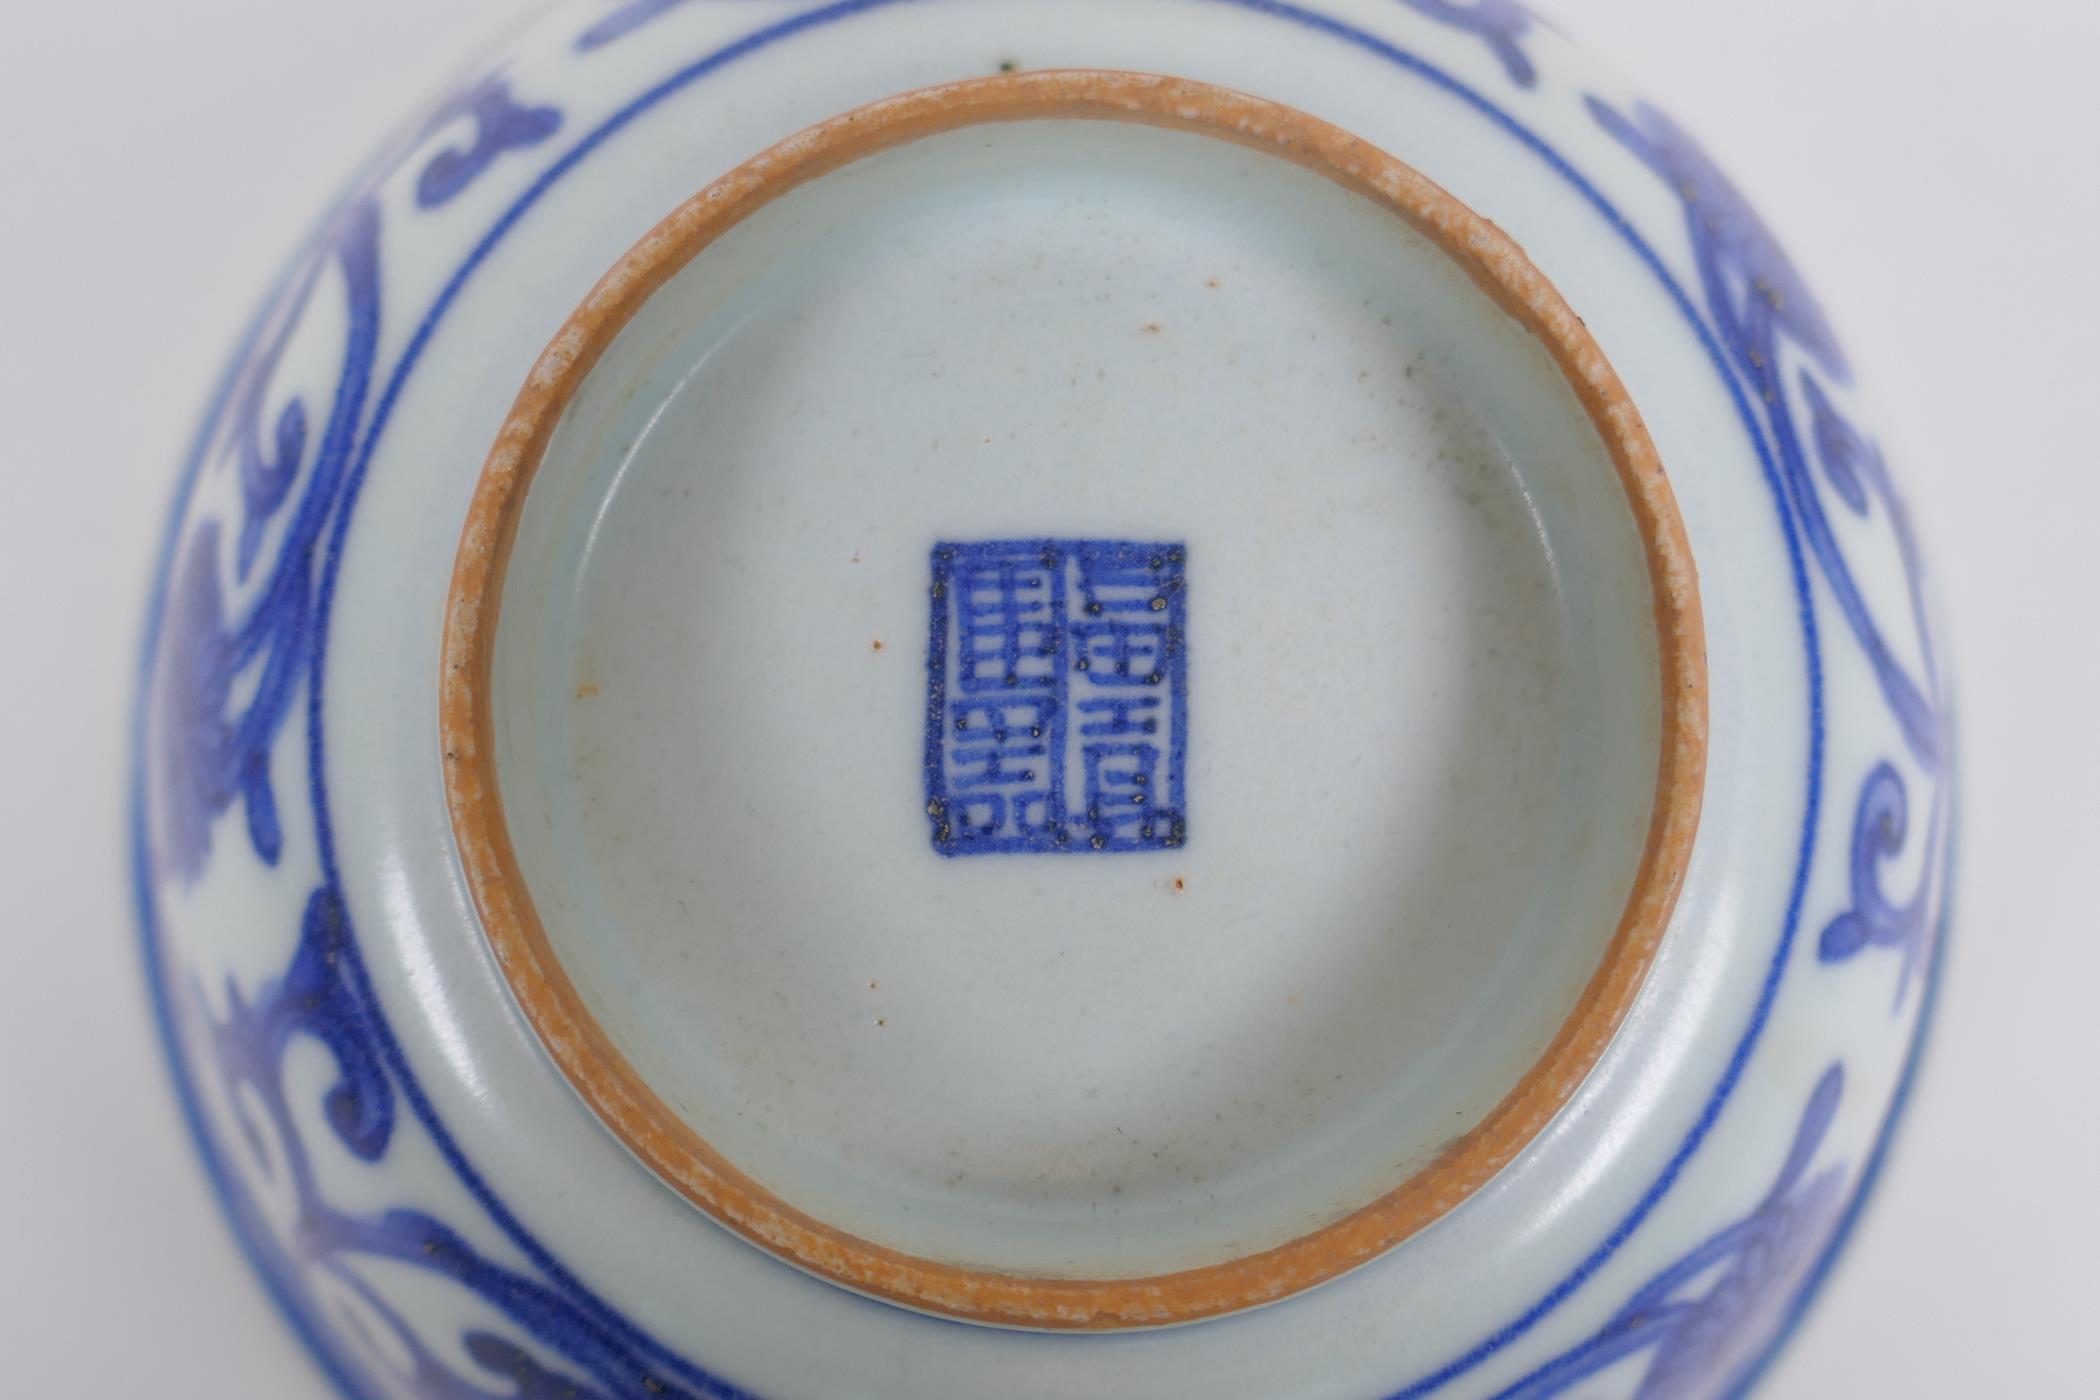 A Chinese blue and white porcelain rice bowl with script and lotus flower decoration, 13cm diameter - Image 4 of 4